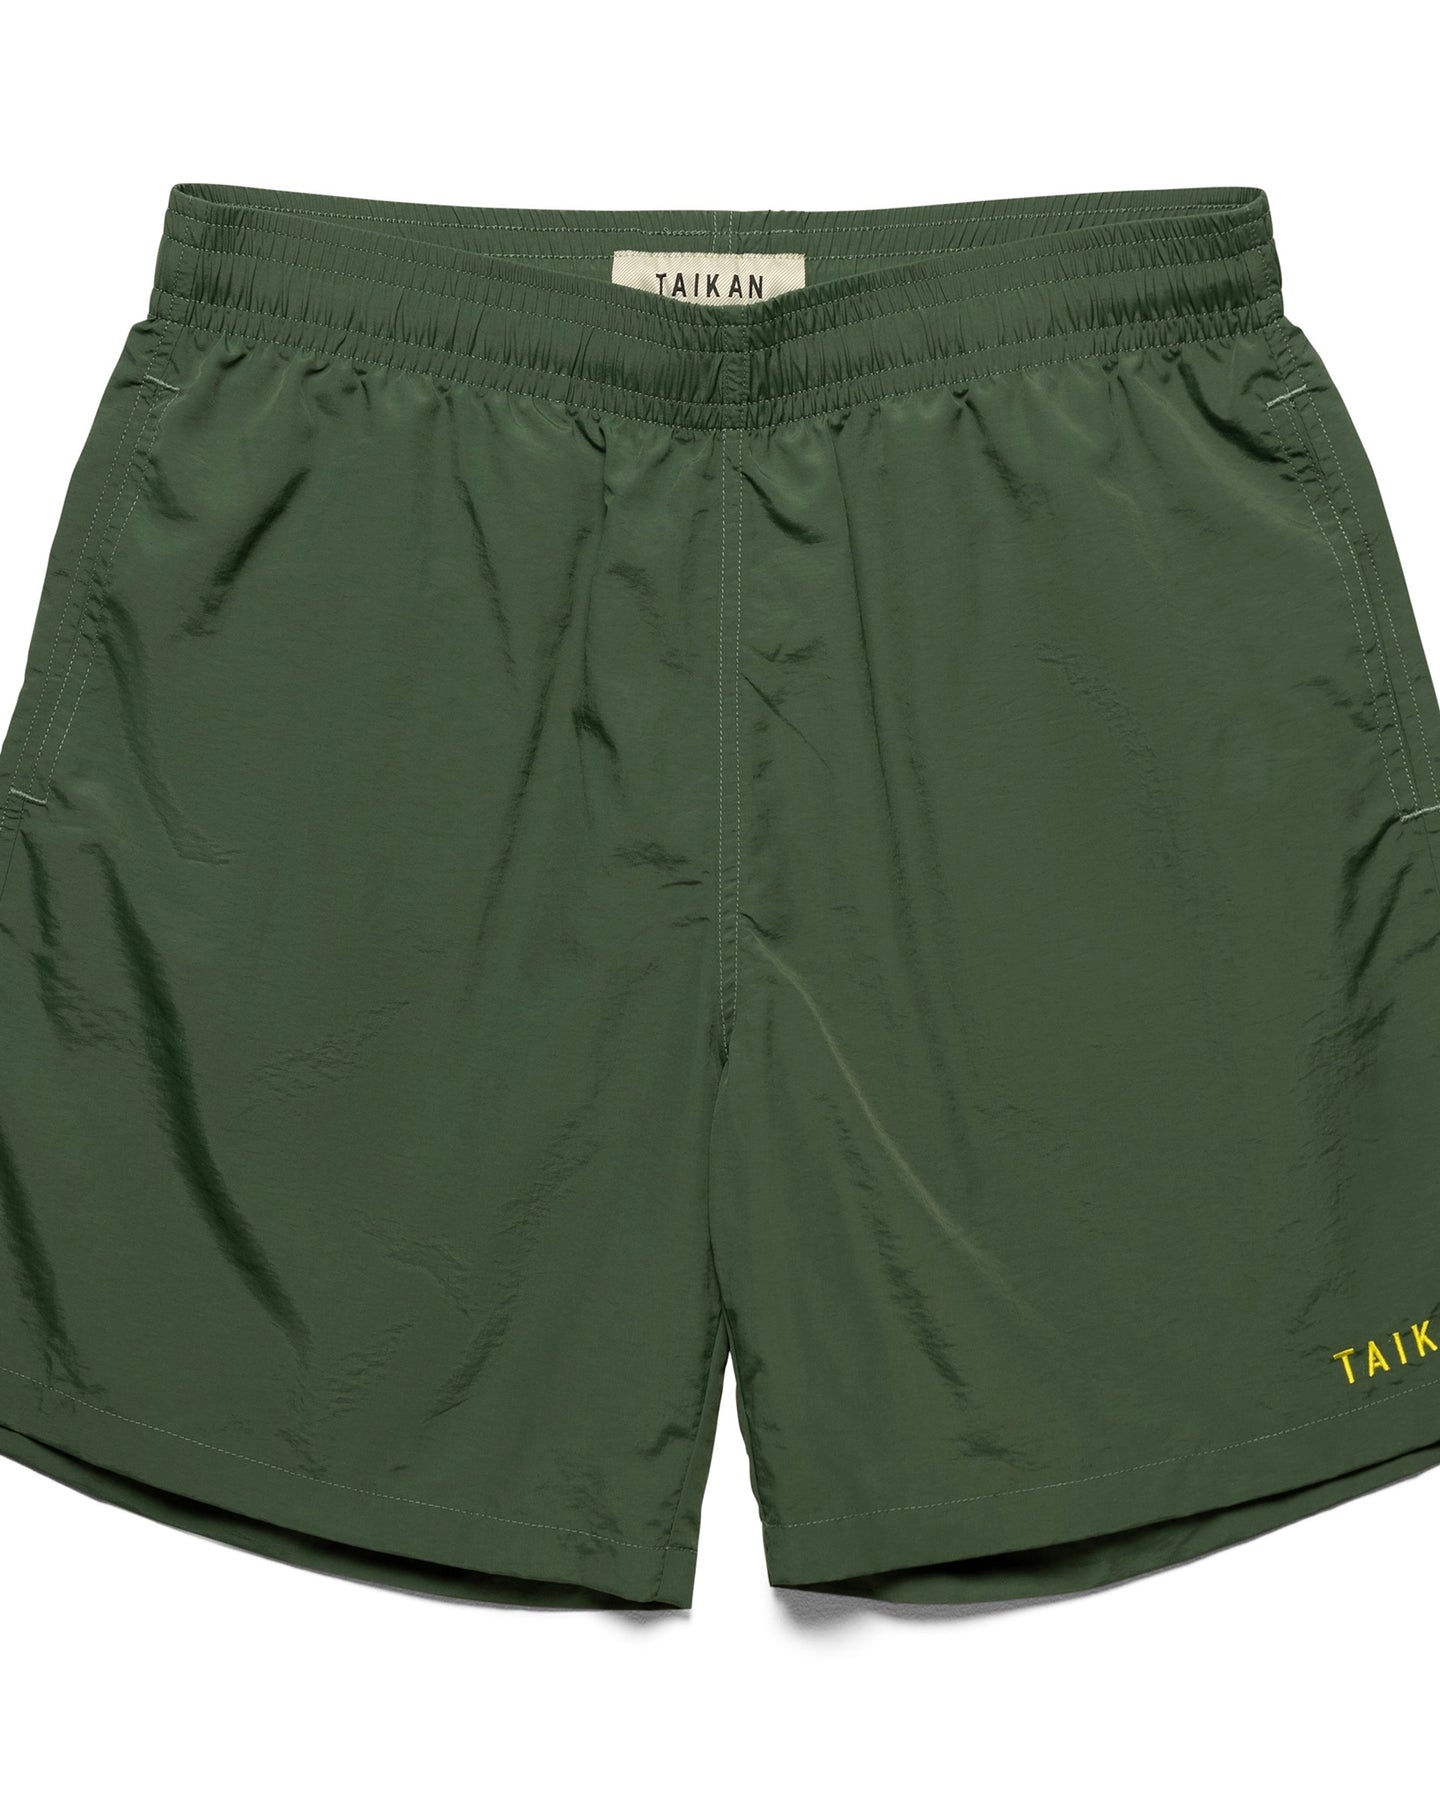 the Taikan Nylon Shorts in Forest Green laying flat on a white background